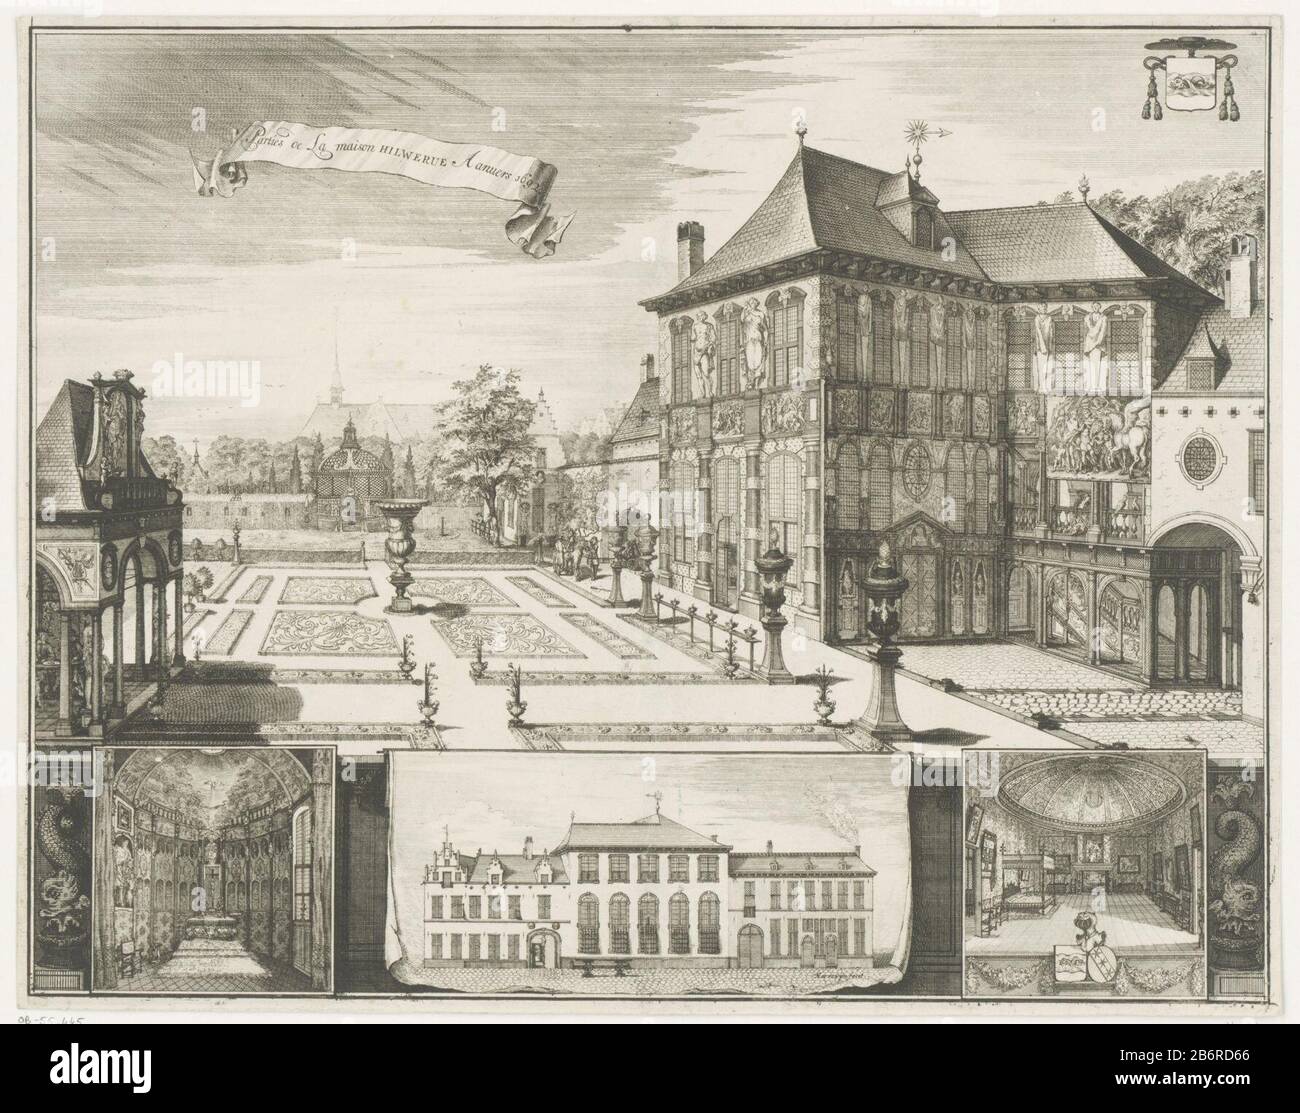 Gezicht op het Rubenshuis te Antwerpen Gezicht op huis Hilwerue te Antwerpen Parties de la maison Hilwerue Aanvers 1692 (titel op object) View of the Rubens House in Antwerp in 1692. View of the back and the garden and decorated with statues and friezes rear. At the bottom of three smaller images of the interior of the chapel, the front view of the housing and one of the interior of the sleeping area with koepel. Manufacturer : print maker: Jacobus Harrewijn (indicated on object) print maker: François Harrewijn (rejected attribution) to drawing of: Jacques van Croes (possible) Place manufactur Stock Photo